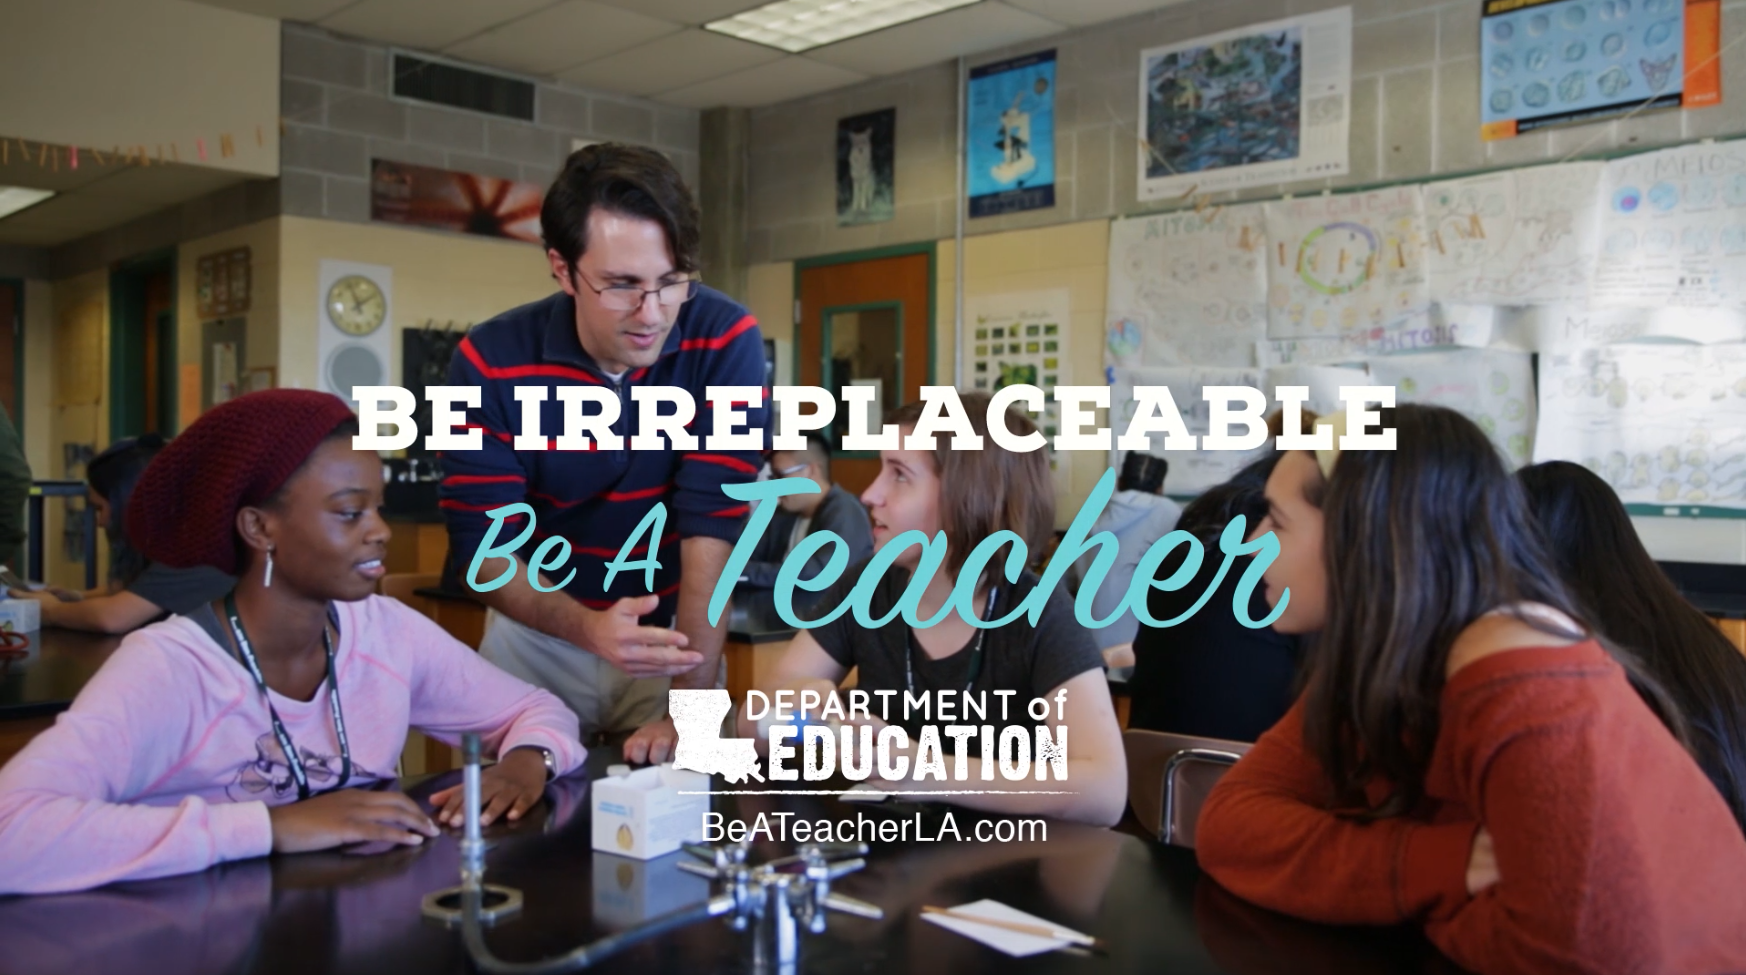 Zehnder Helps the Louisiana Department of Education Prove How Teachers are Irreplaceable